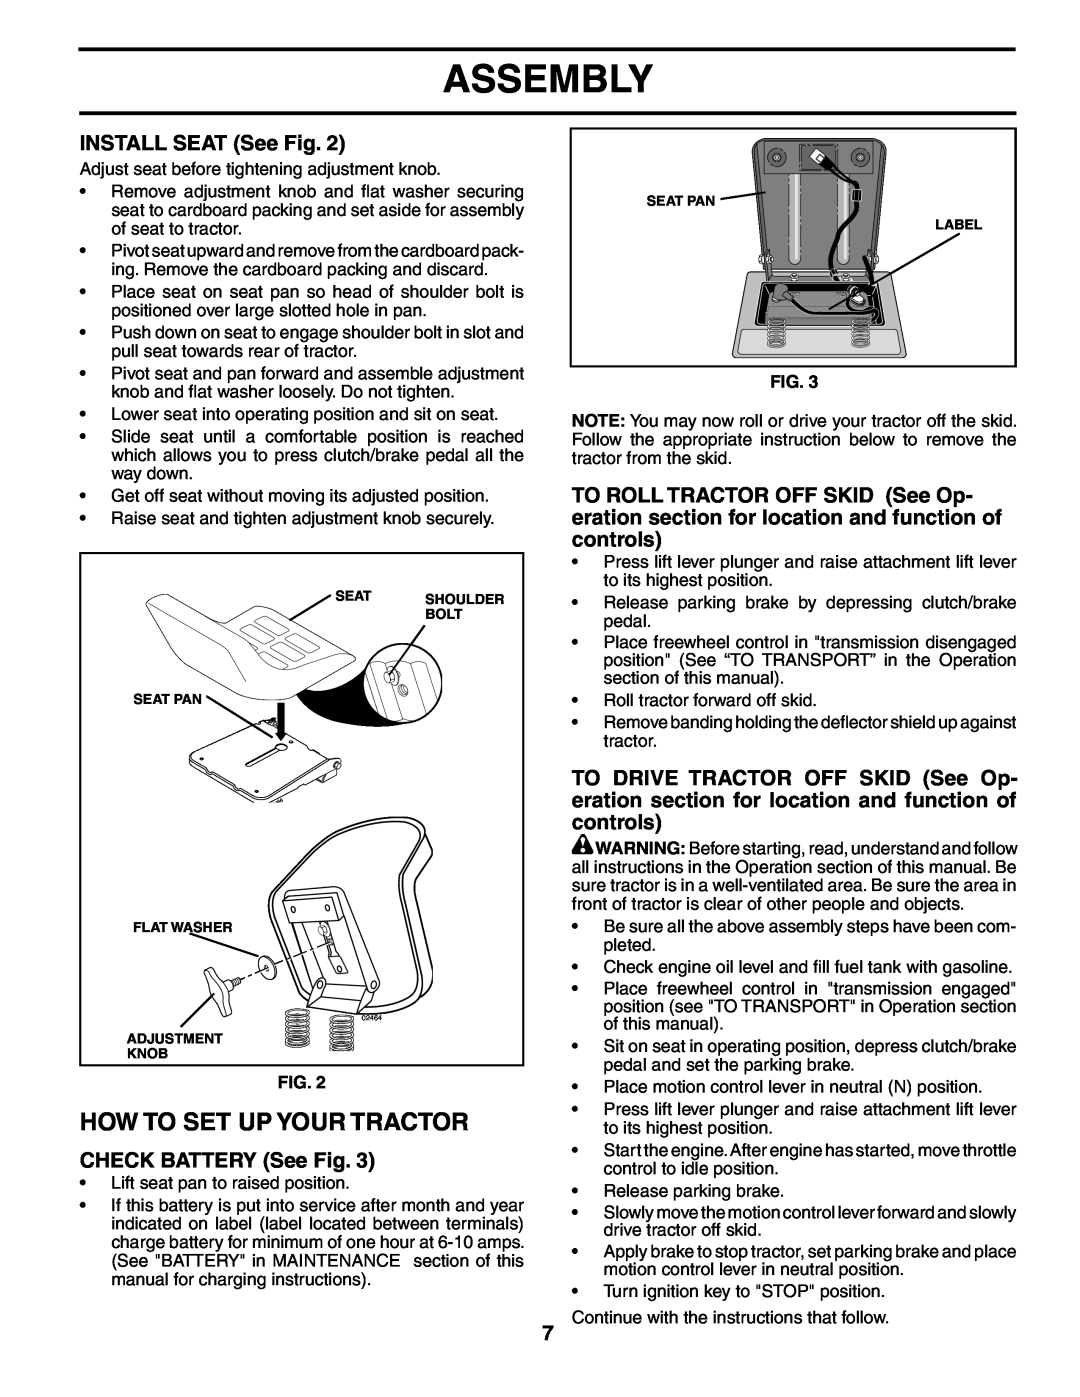 Husqvarna LTH18542 owner manual How To Set Up Your Tractor, INSTALL SEAT See Fig, CHECK BATTERY See Fig, Assembly 